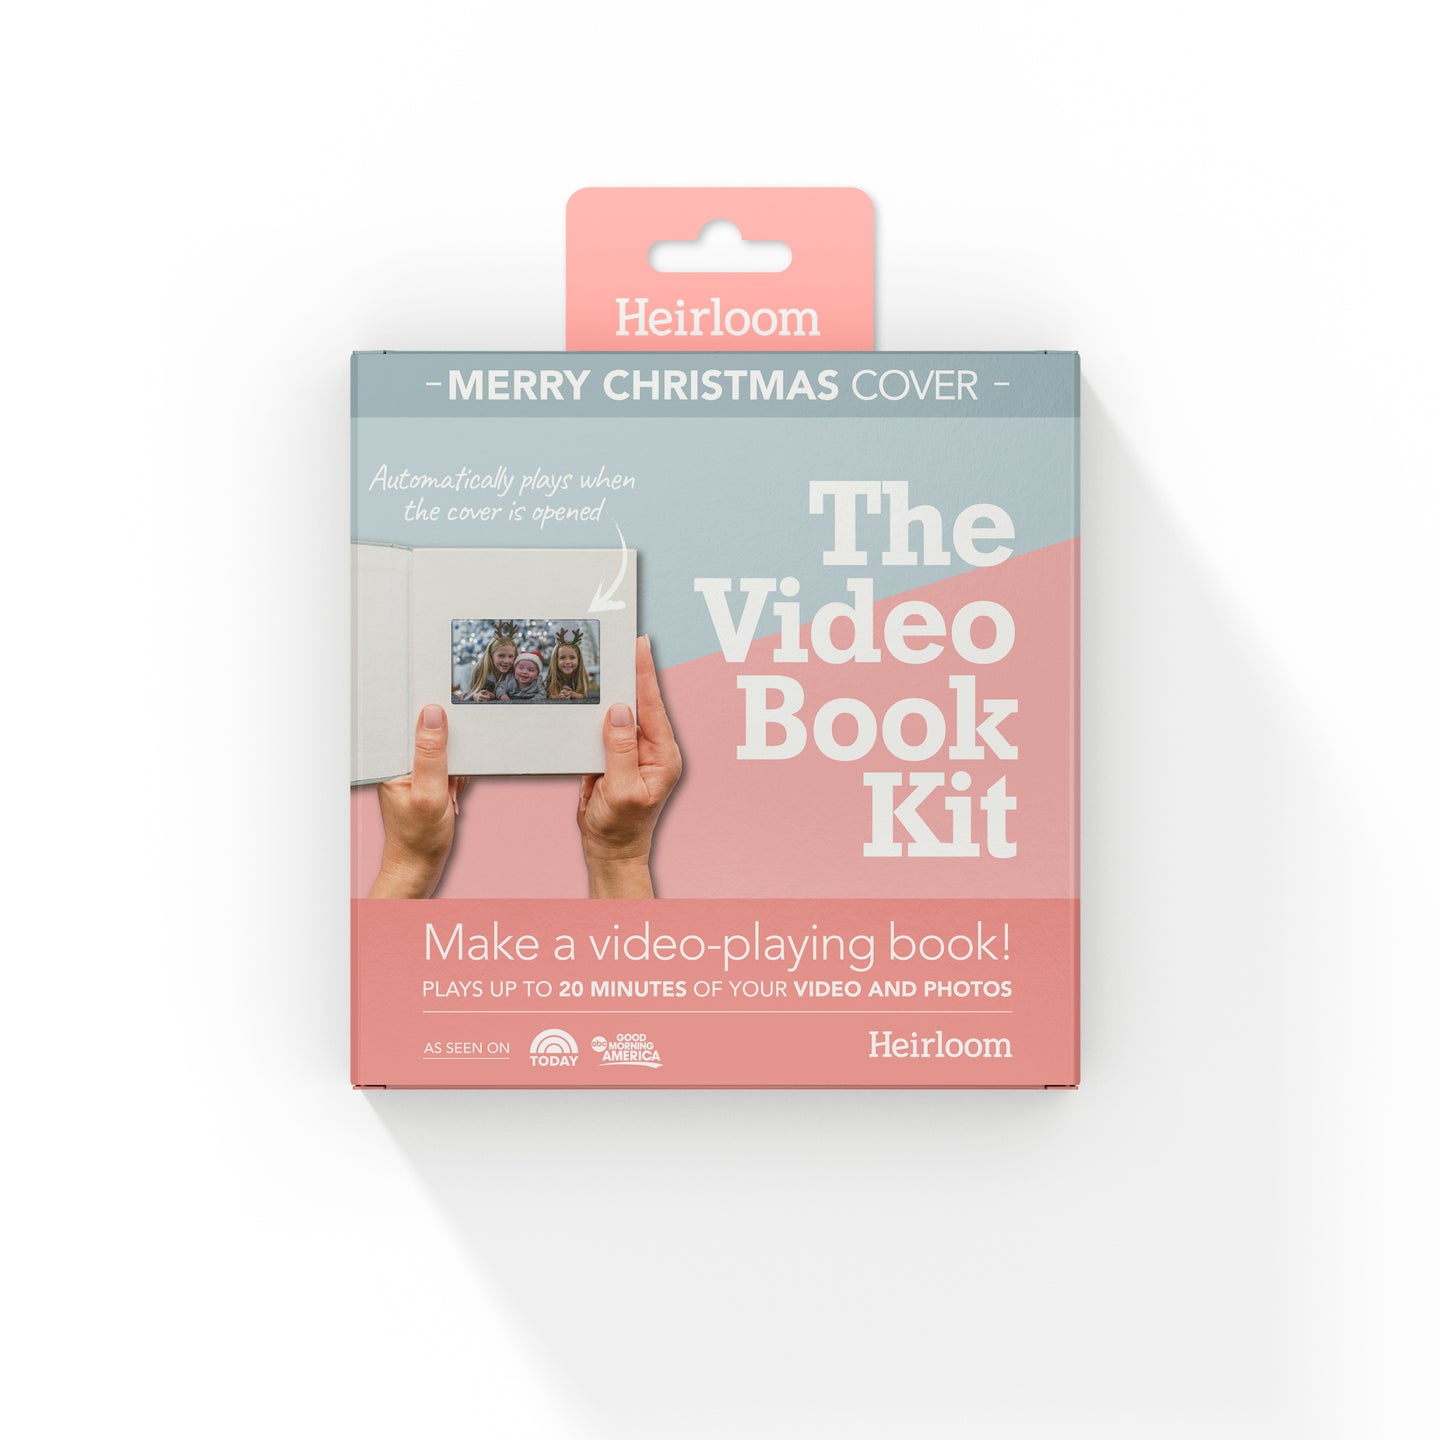 Video Book Kit - Merry Christmas Cover